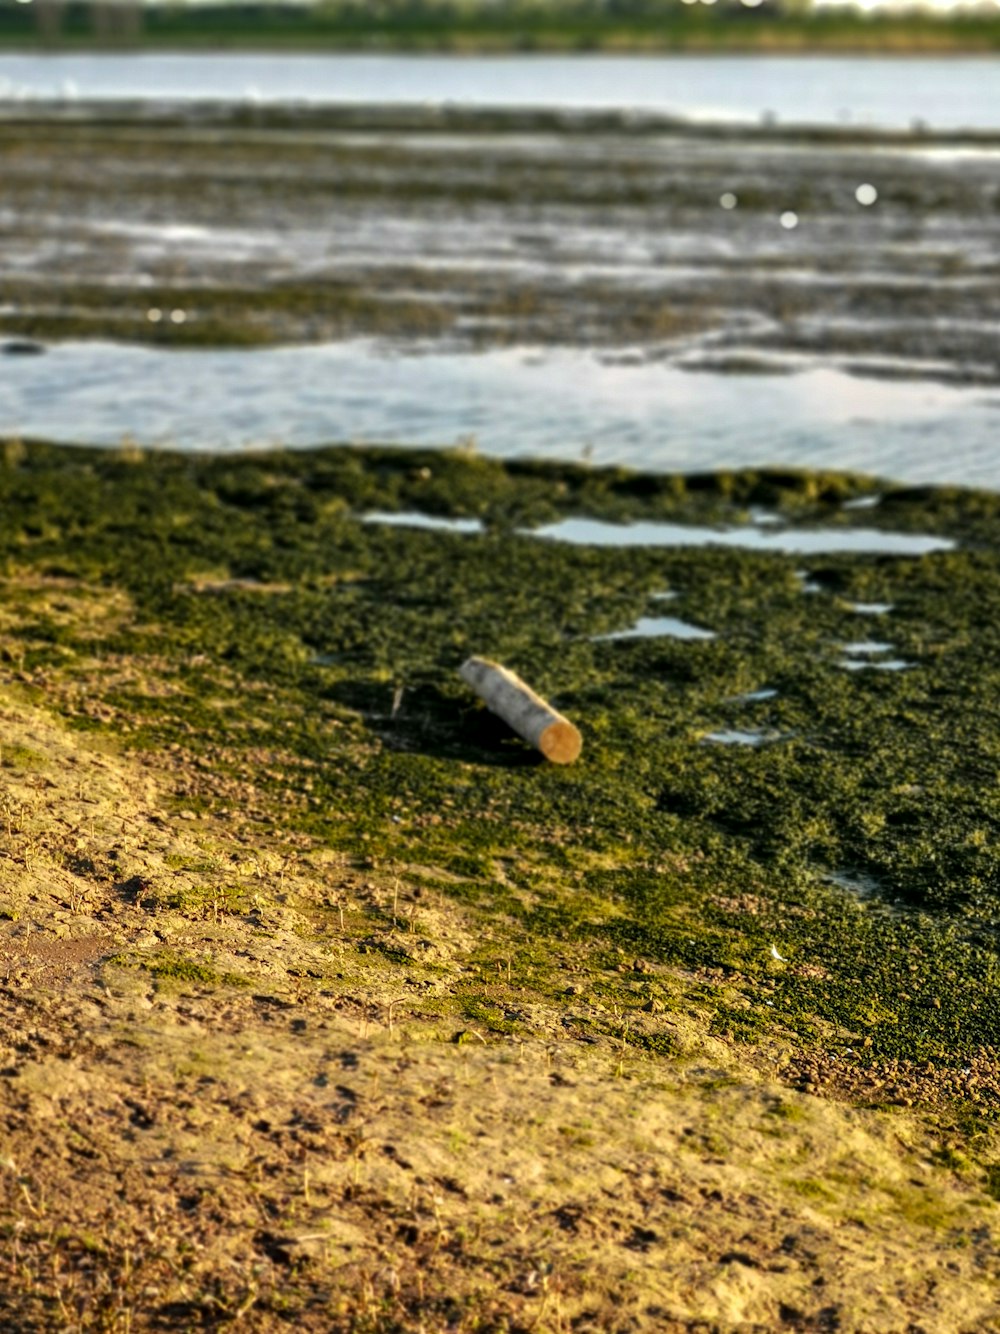 clear glass bottle on brown sand near body of water during daytime